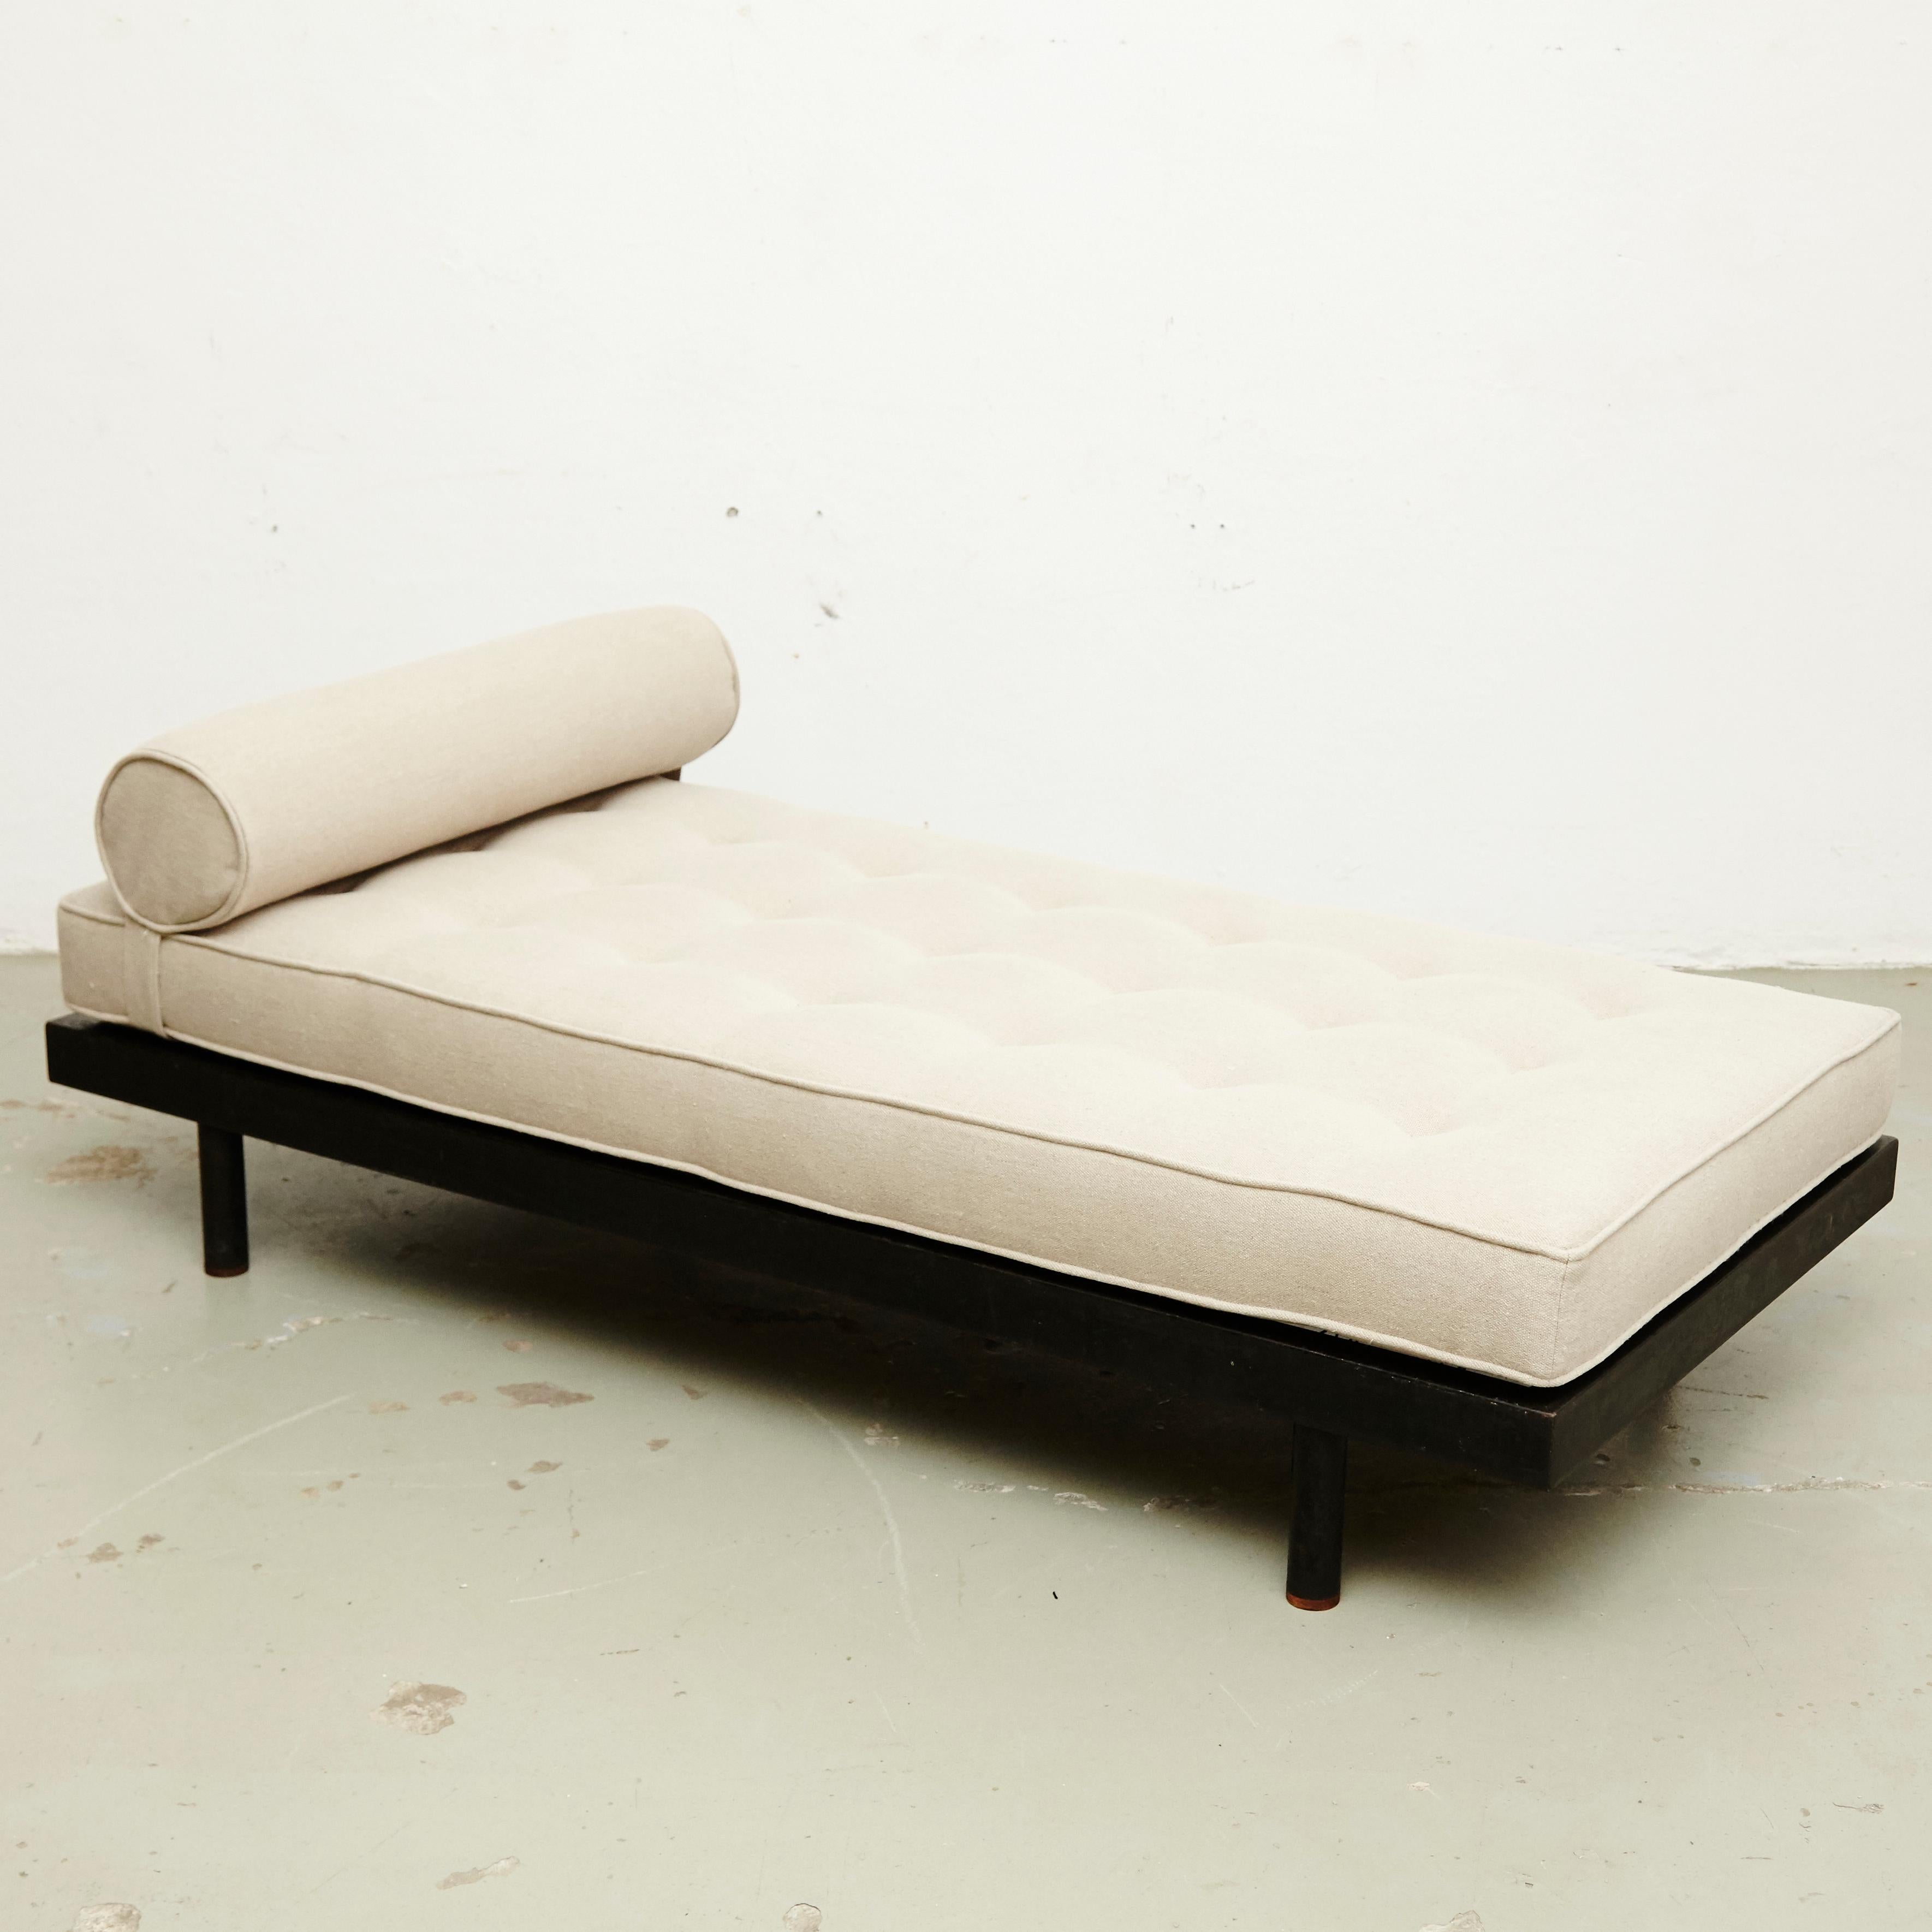 Daybed designed by Jean Prouve manufactured by Ateliers Prouve (France), circa 1950.

In good condition, with minor wear consistent with age and use, preserving a beautiful patina.
It has some traces of rust and the wood and metal has been